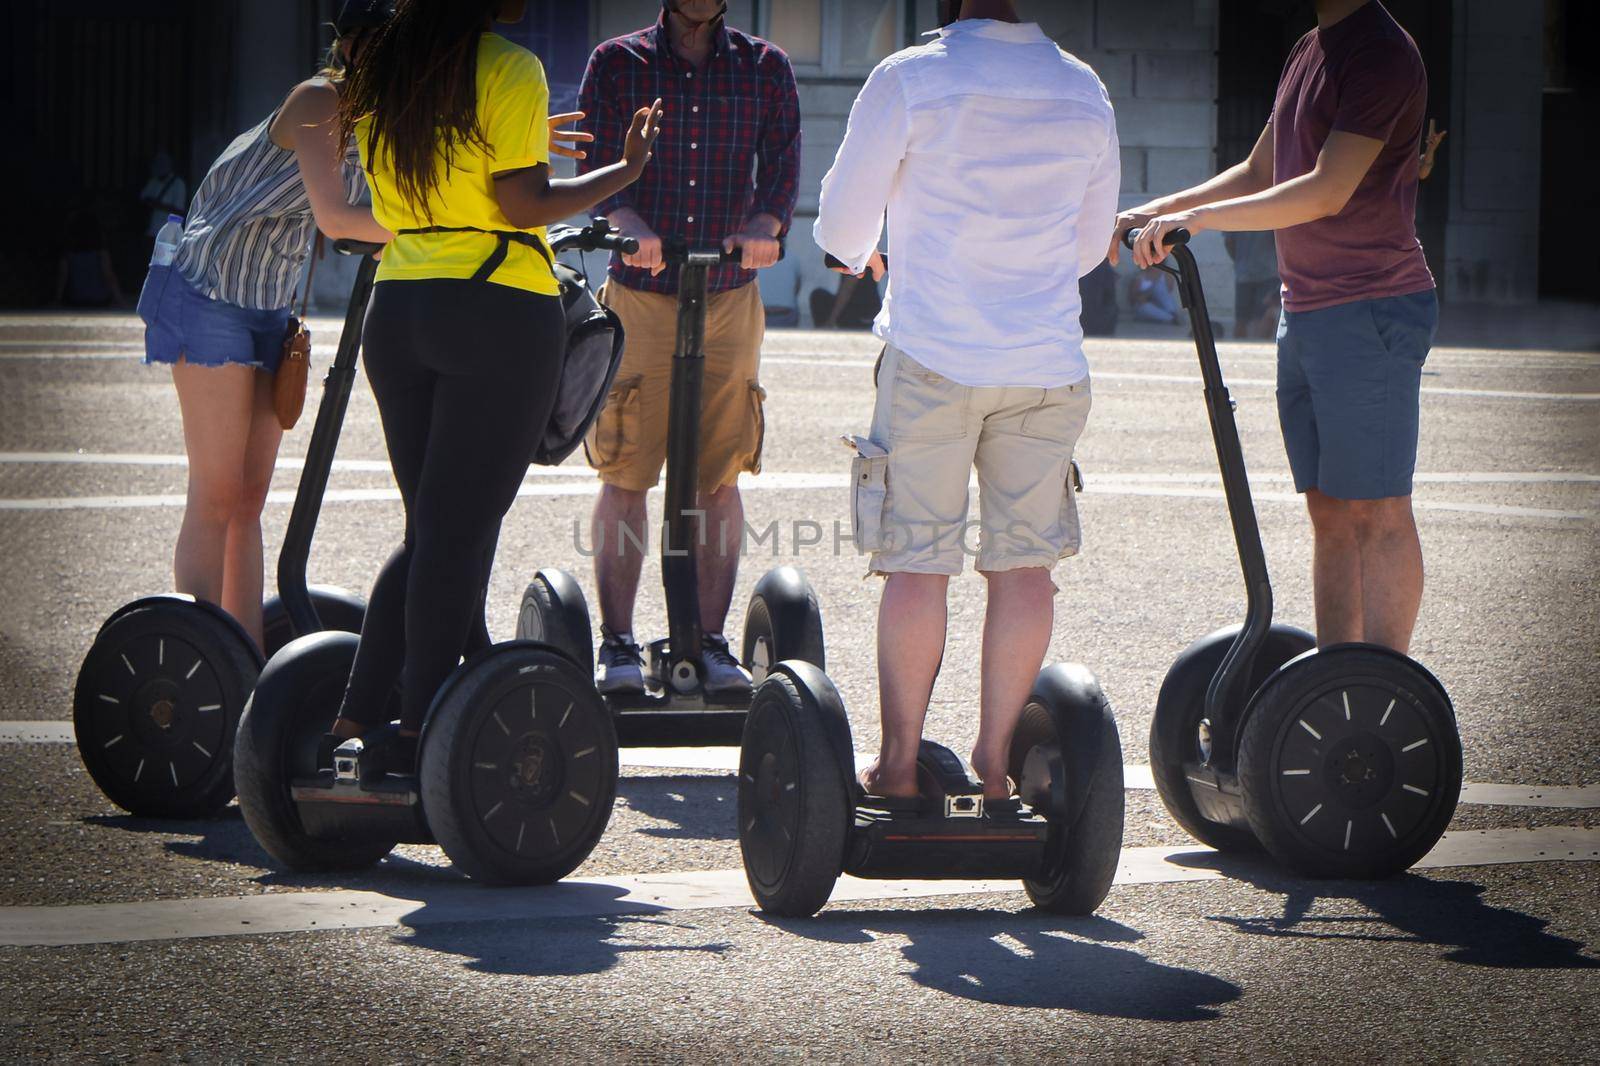 A group of people guided segway tour in a tourist place